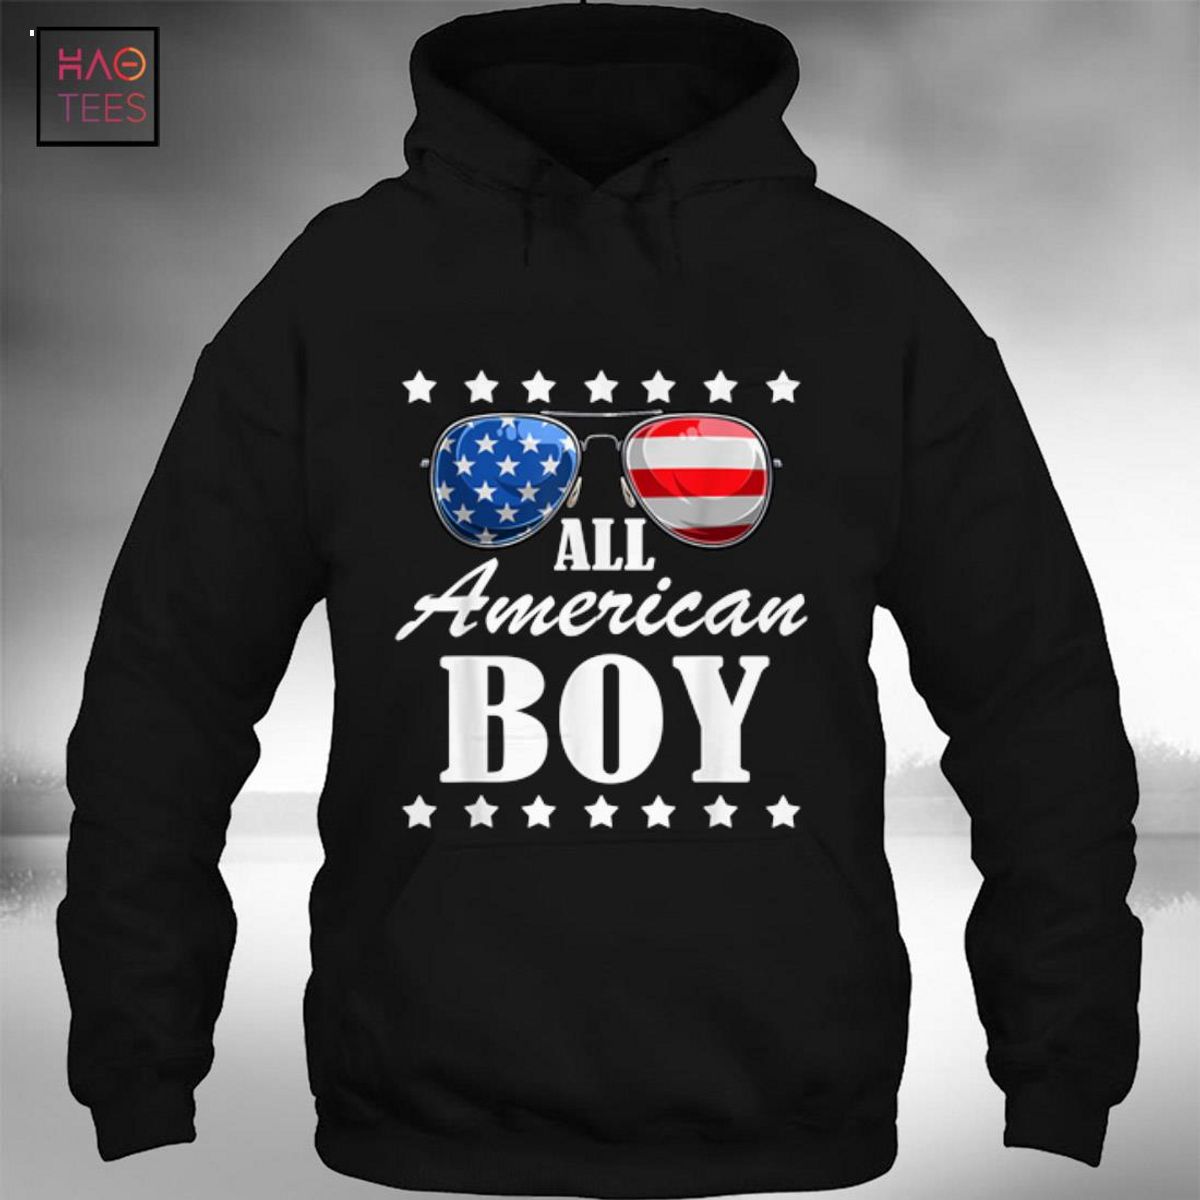 American Unity Fist Independence Day Shirt Unisex Hoodies Unisex T-shirt Unisex Sweatshirt